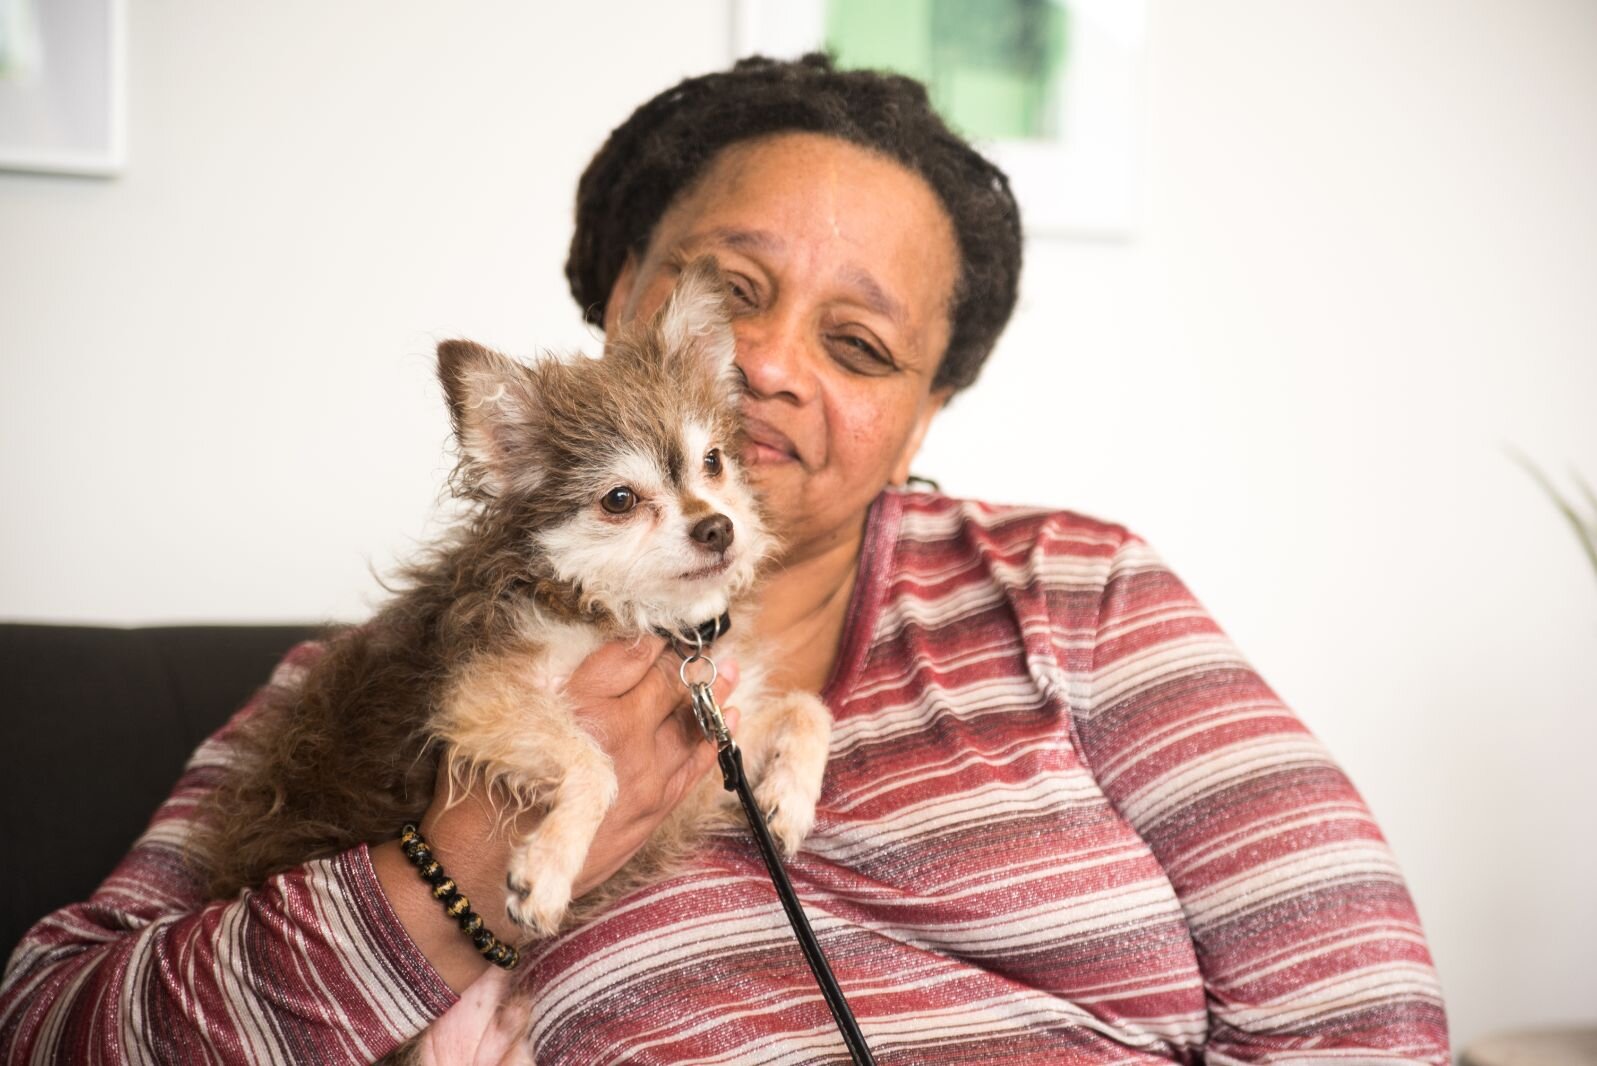 Harrison Circle Apartments resident Carmen and her dog enjoy its well-lighted lobby area.